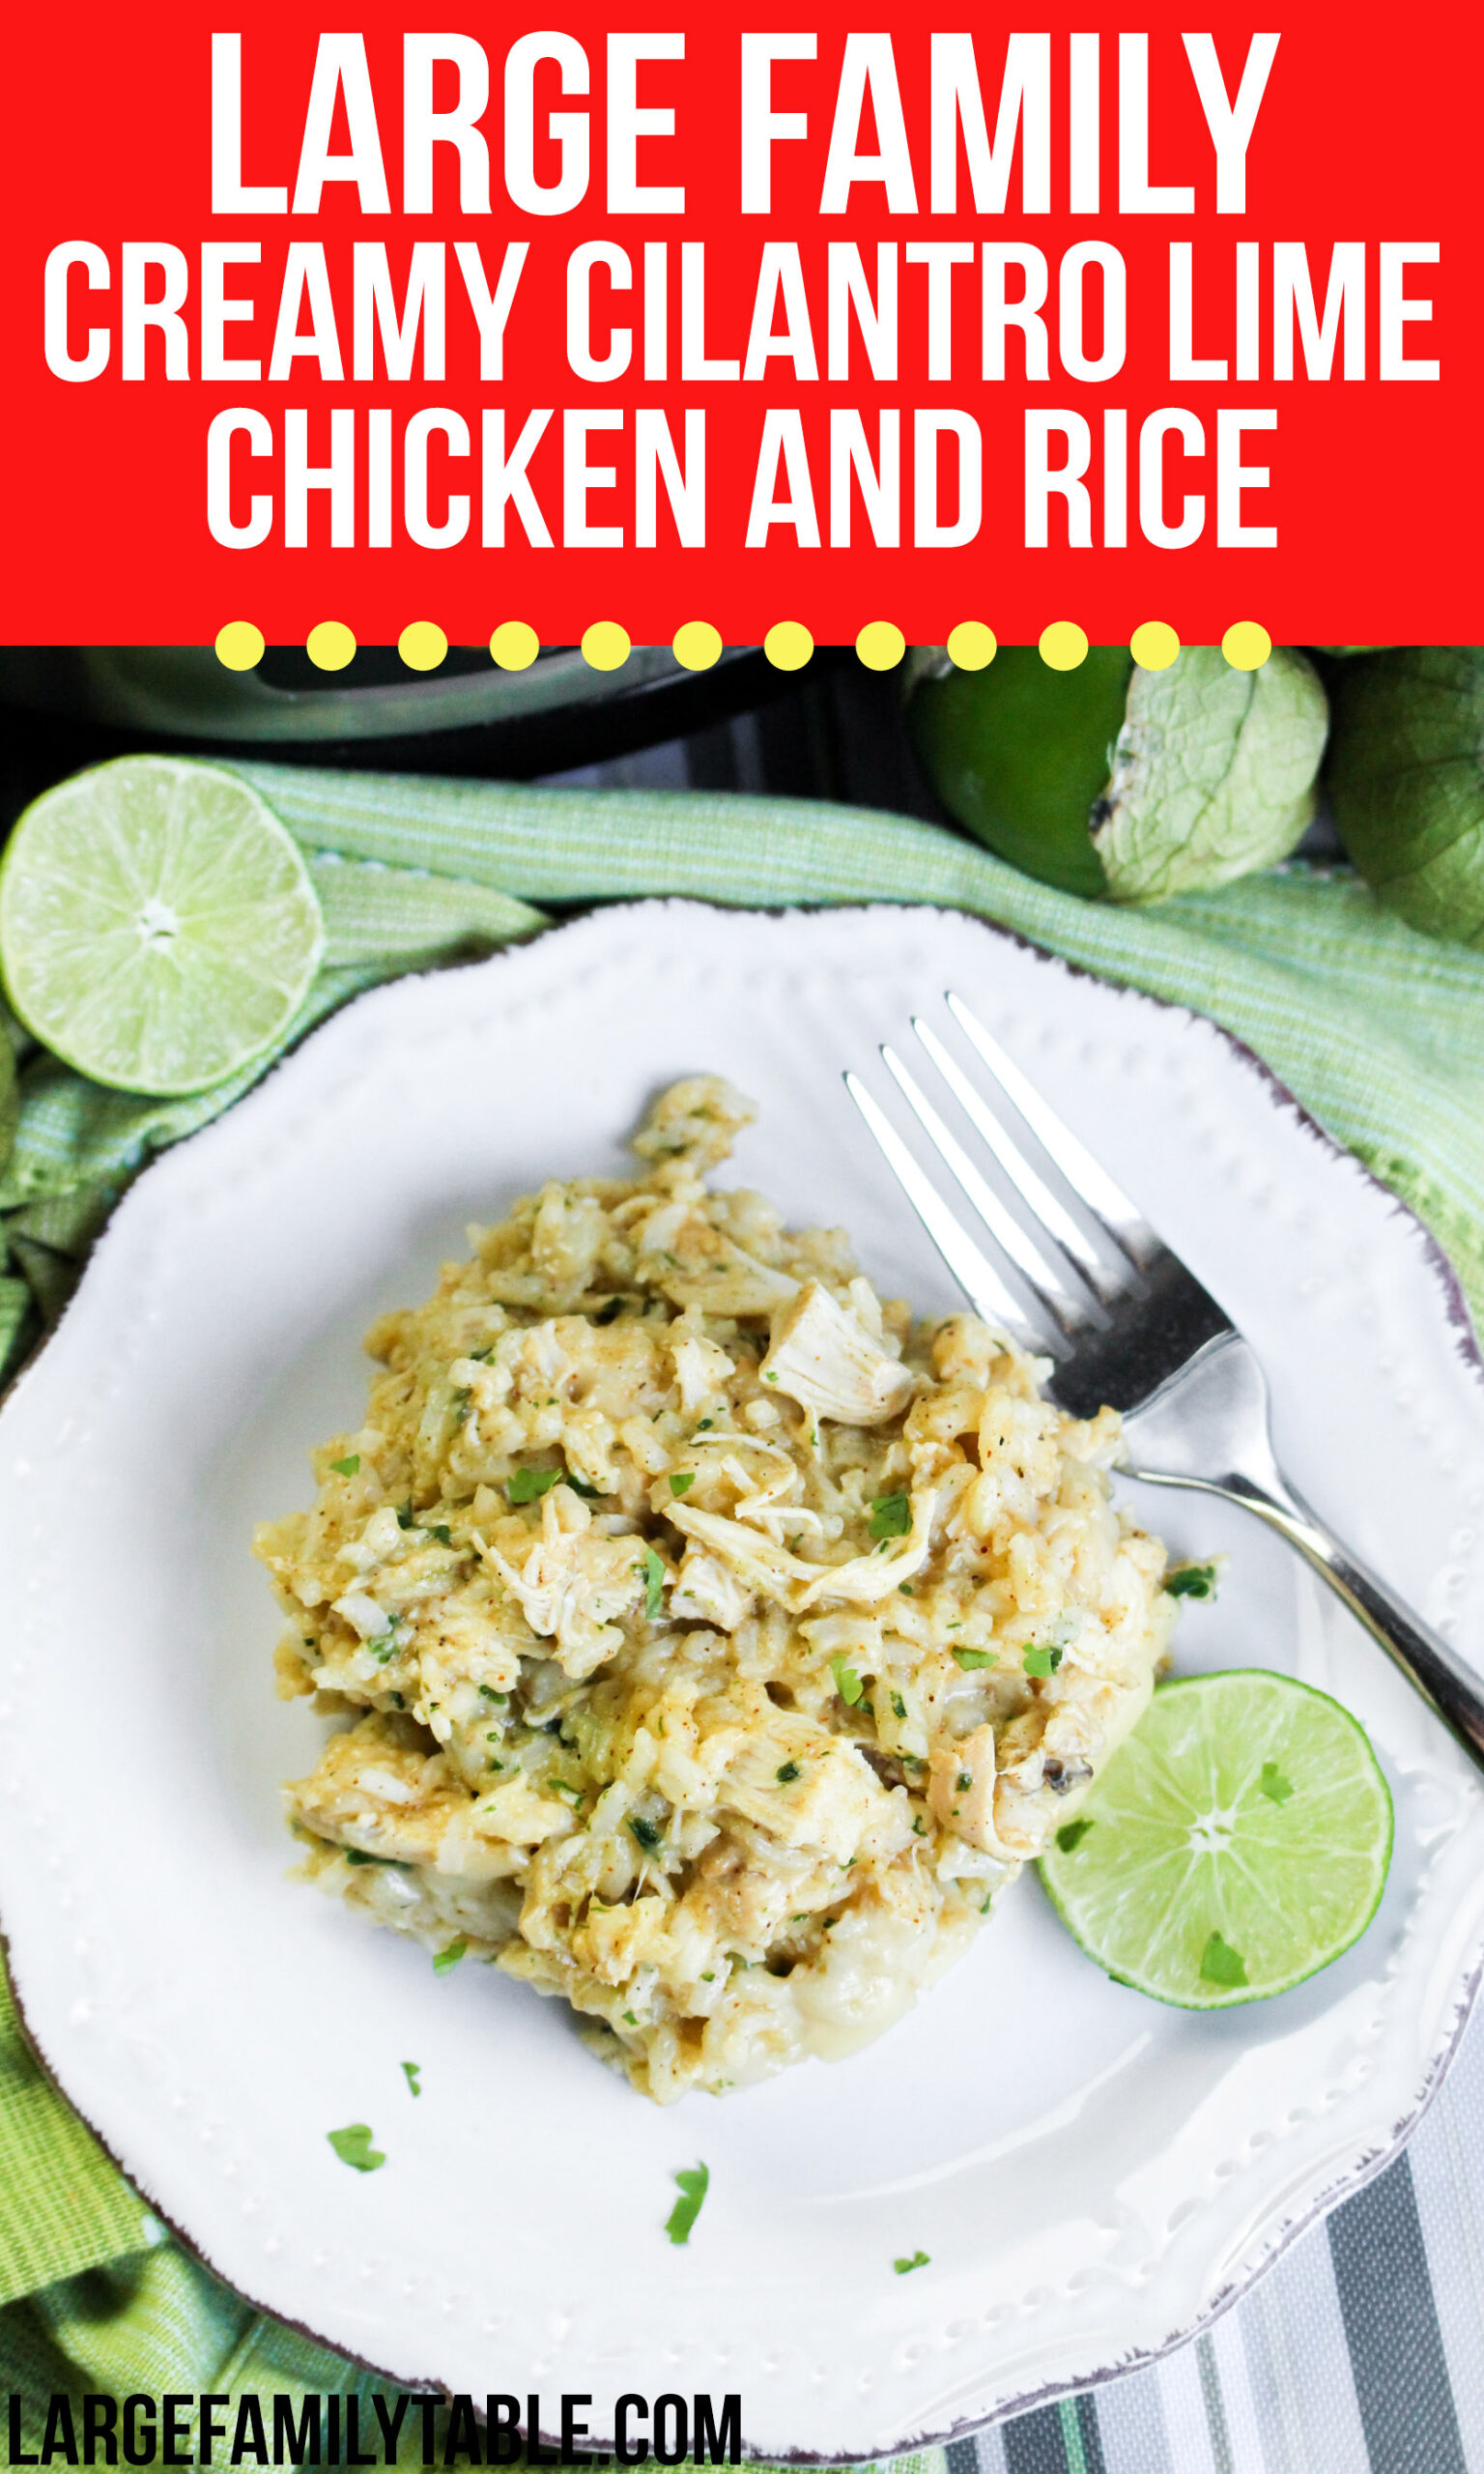 https://largefamilytable.com/wp-content/uploads/2022/05/Large-Family-Creamy-Cilantro-Lime-Chicken-and-Rice-scaled.jpg